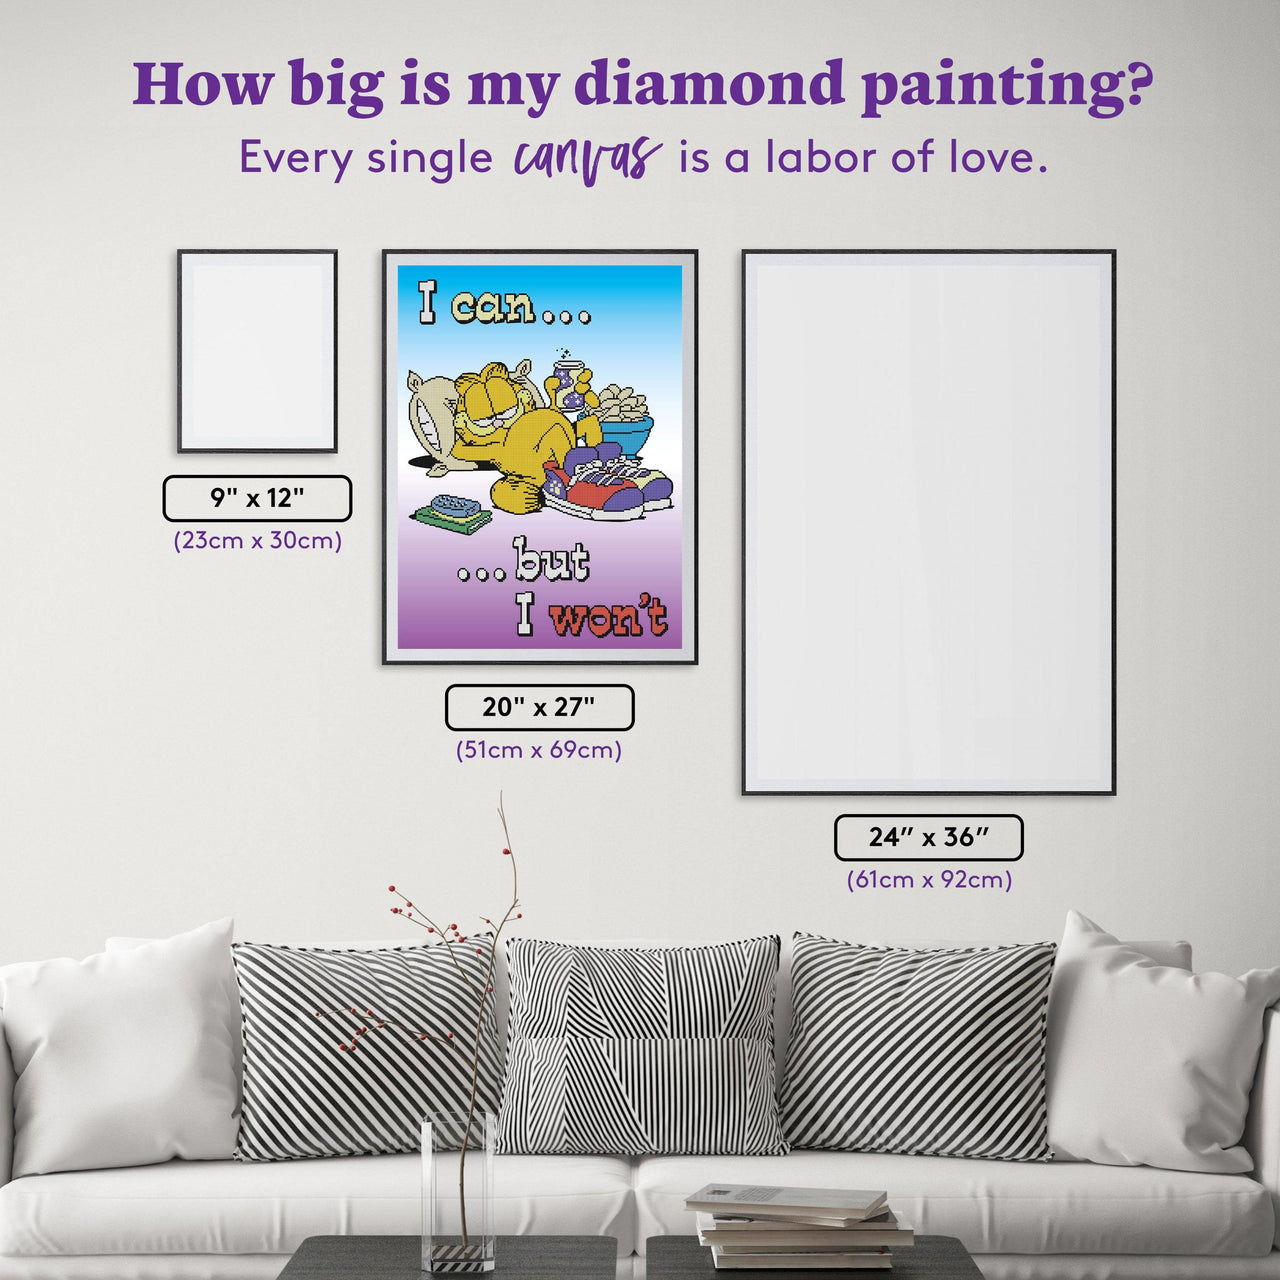 Diamond Painting I Can But I Won't 20" x 27″ (51cm x 69cm) / Round with 13 Colors including 3 ABs / 16,594